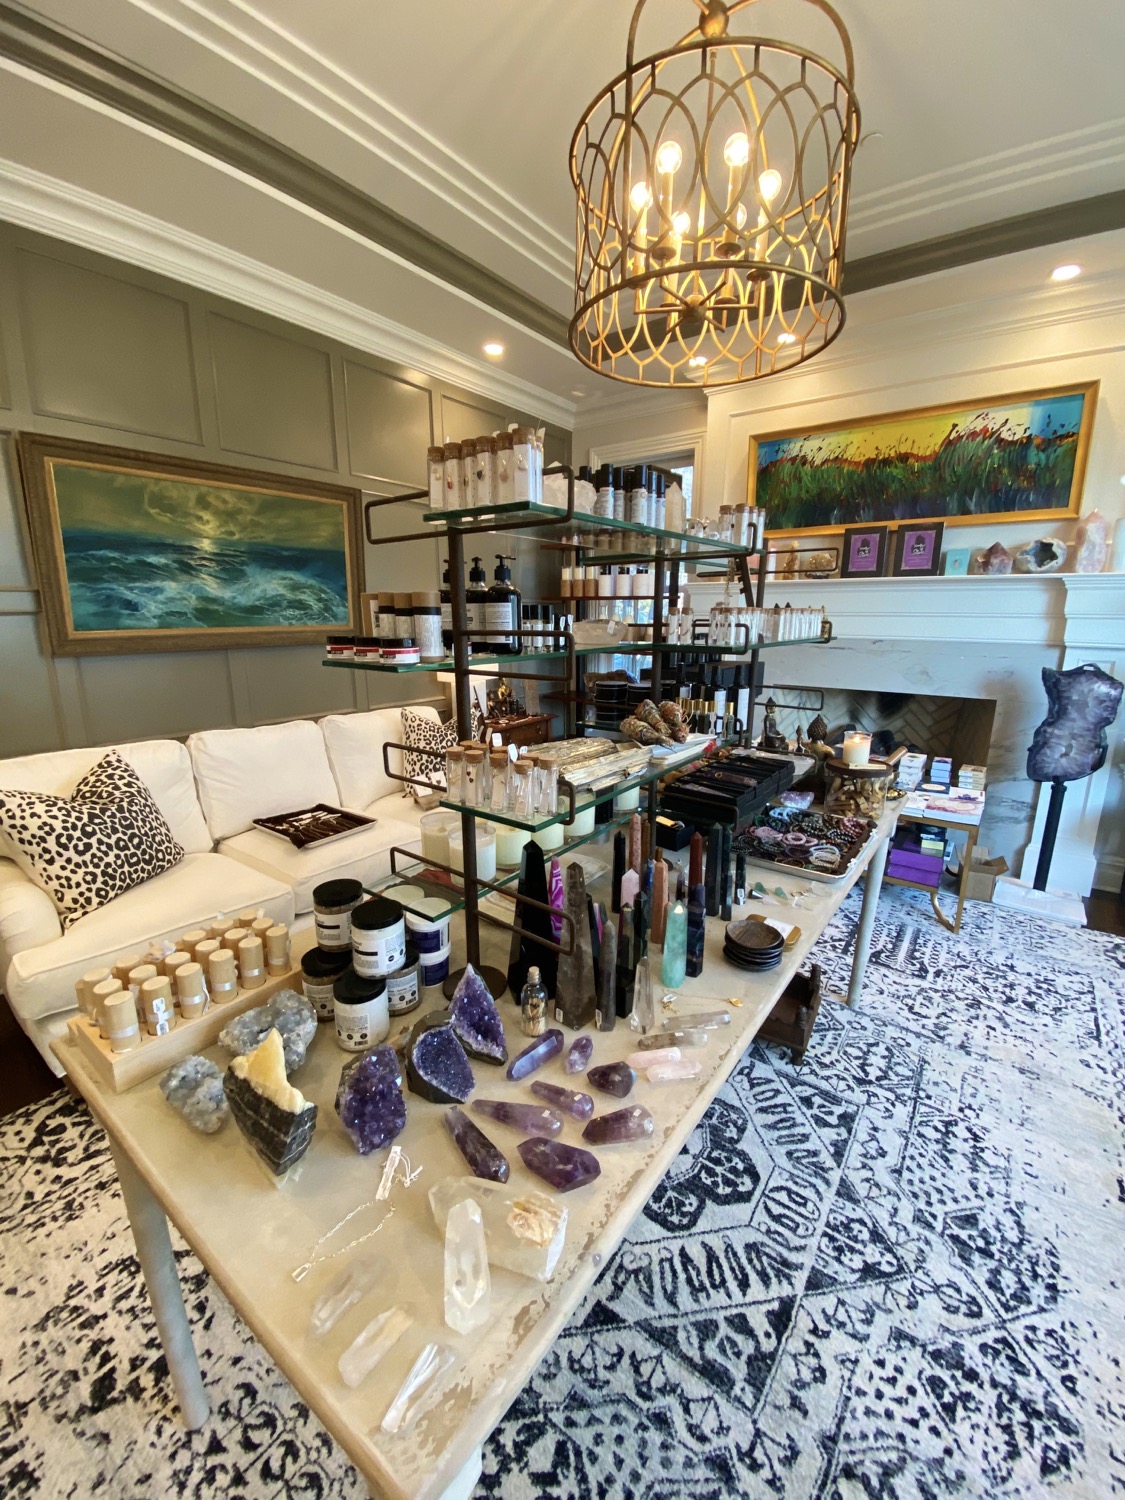 A Sneak Peek of The Rock Box: Morristown’s new Crystal, Lifestyle Boutique